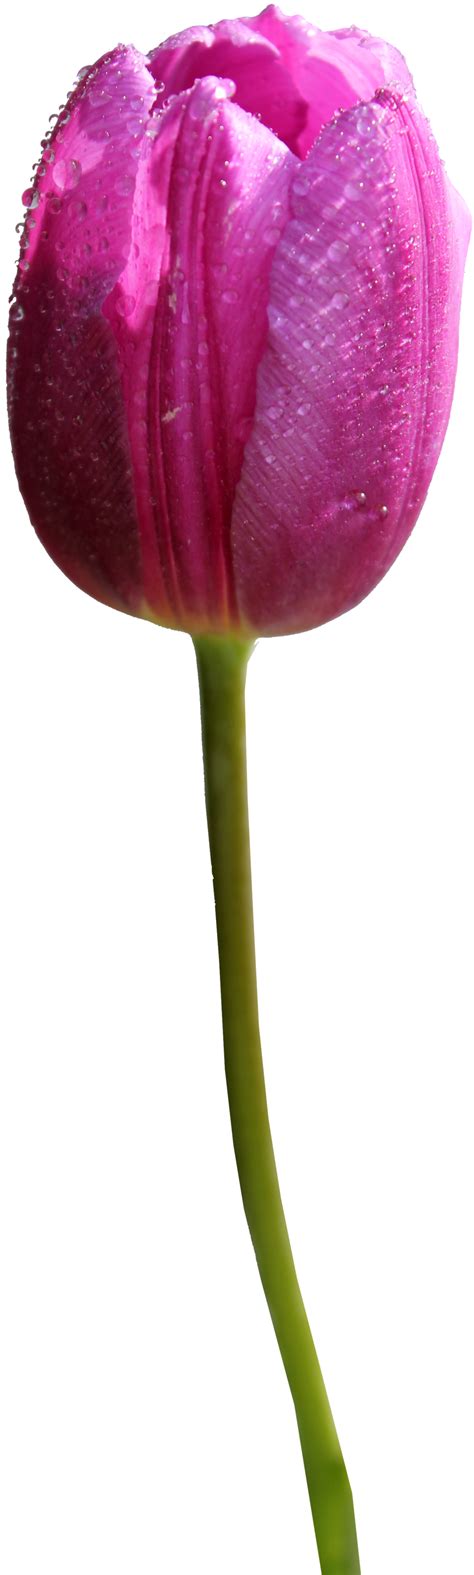 Tulip PNG Transparent Images | PNG All